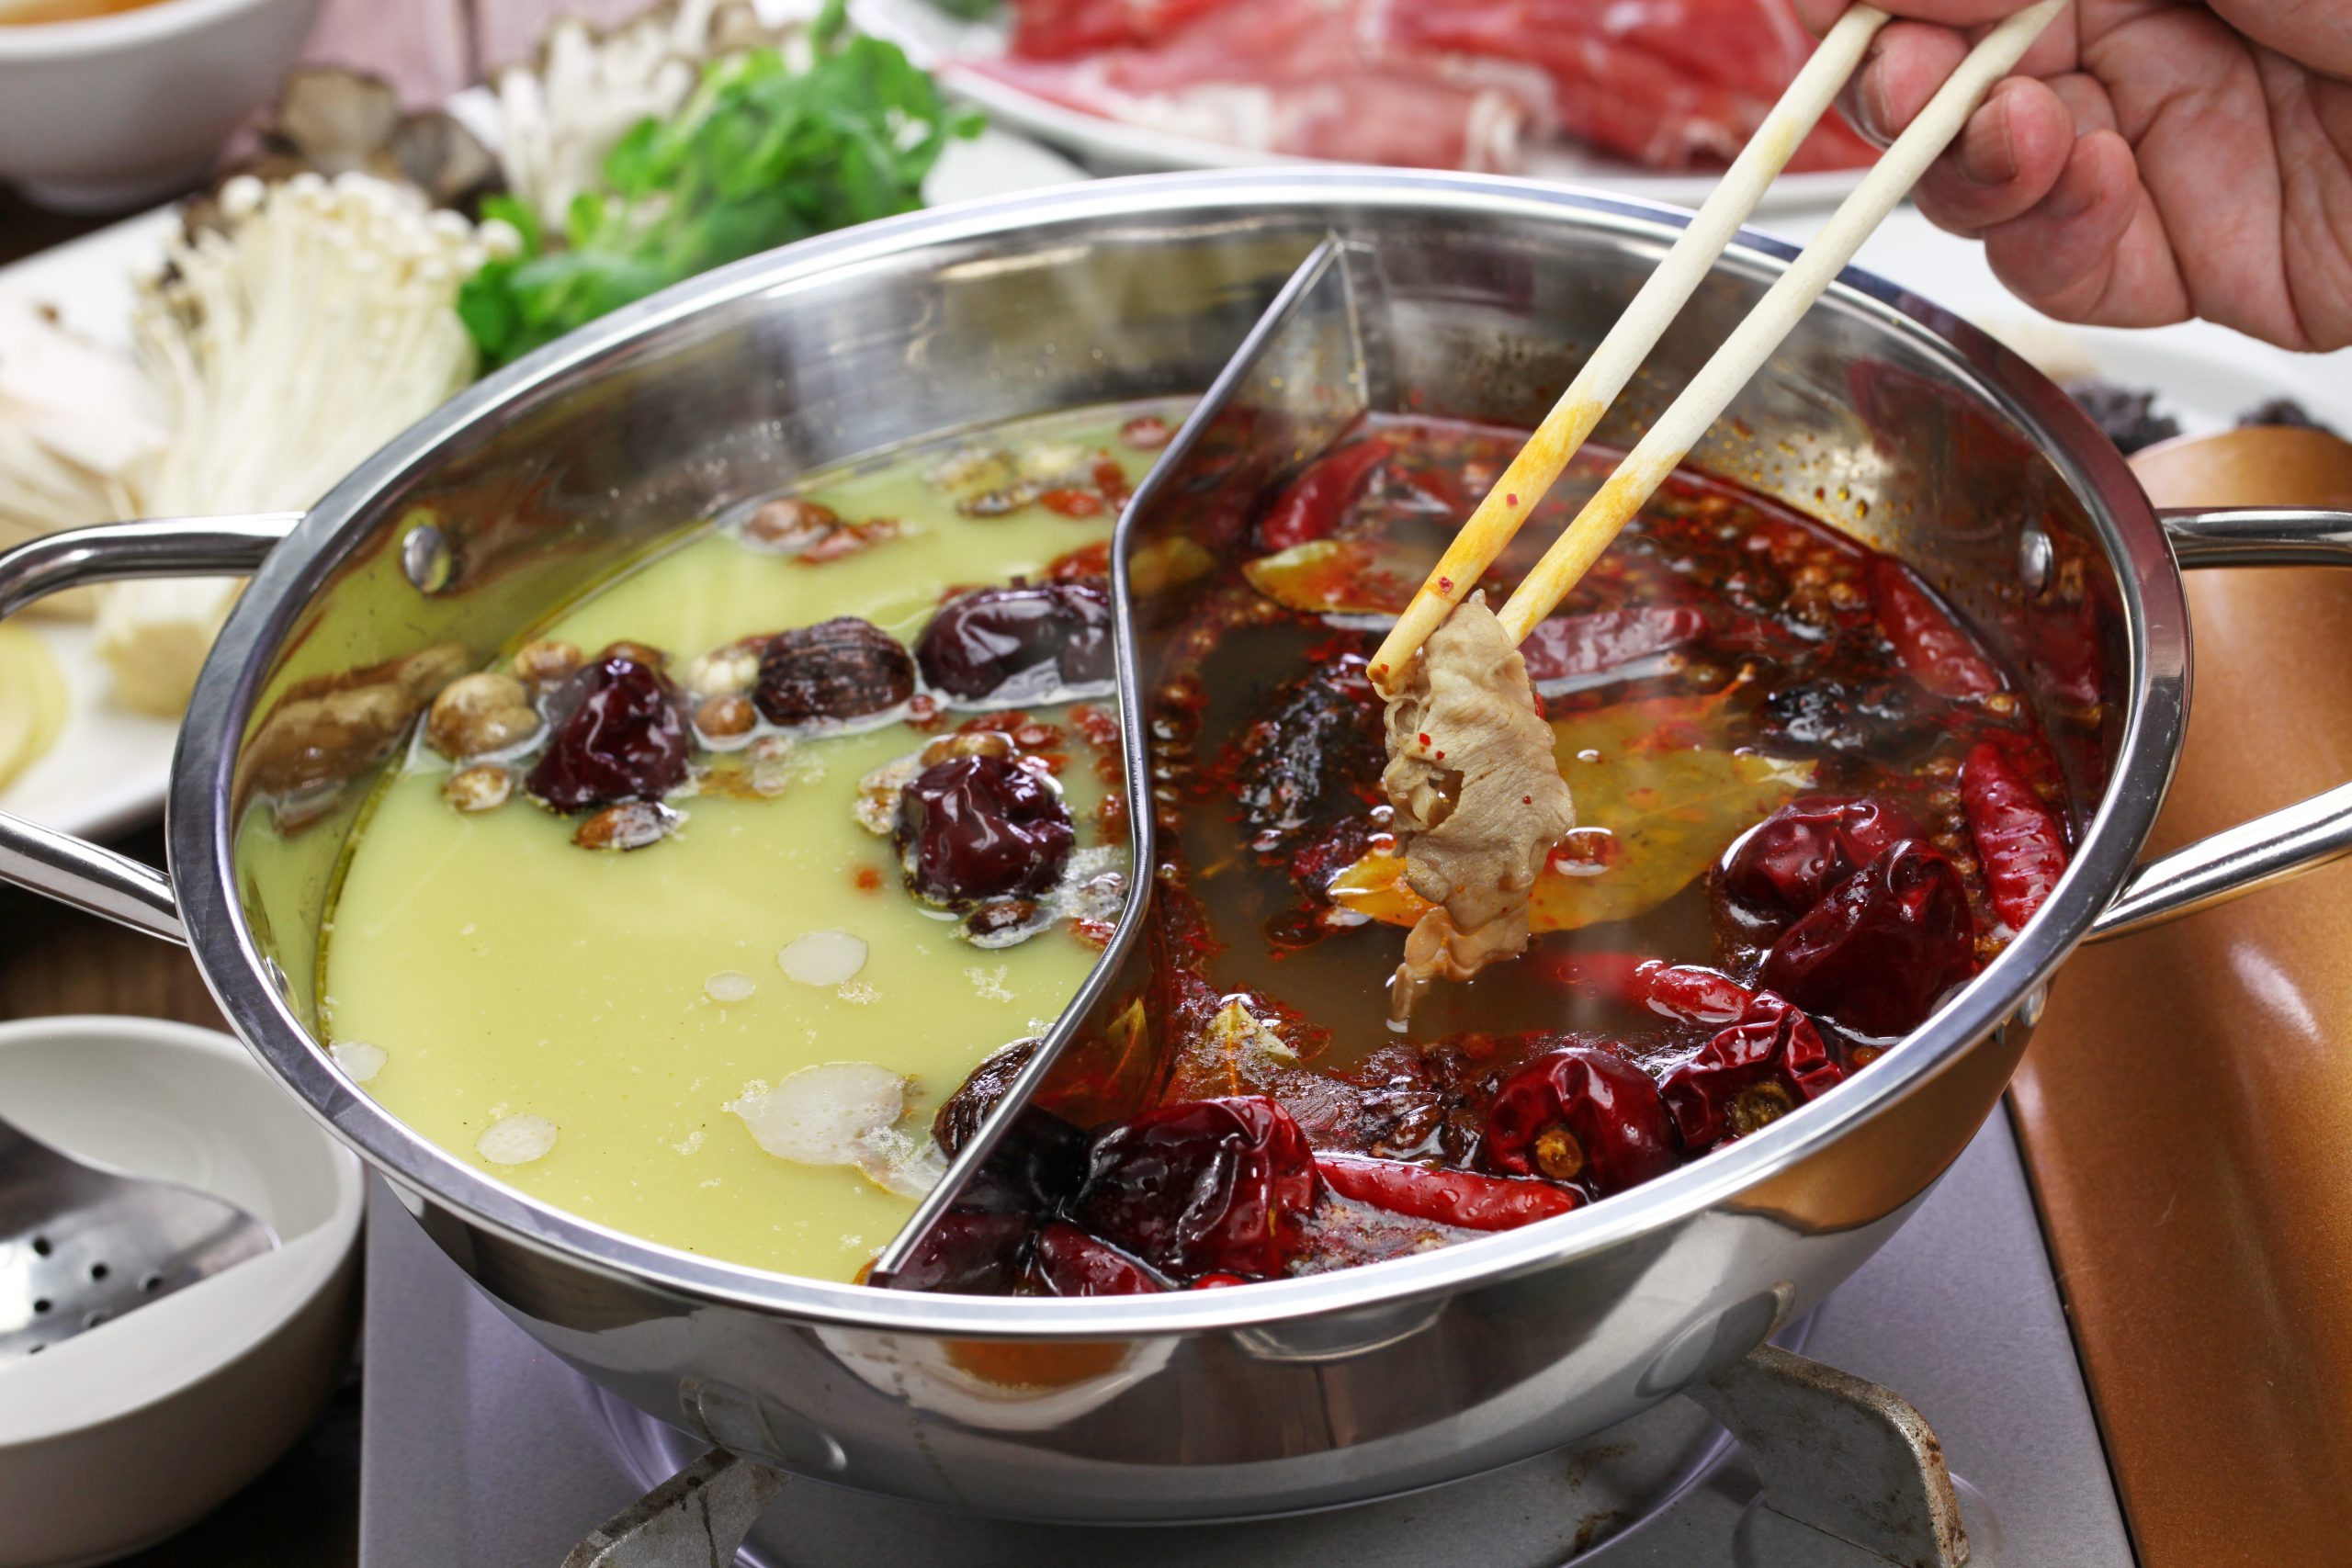 Spicy Hot Pots in China